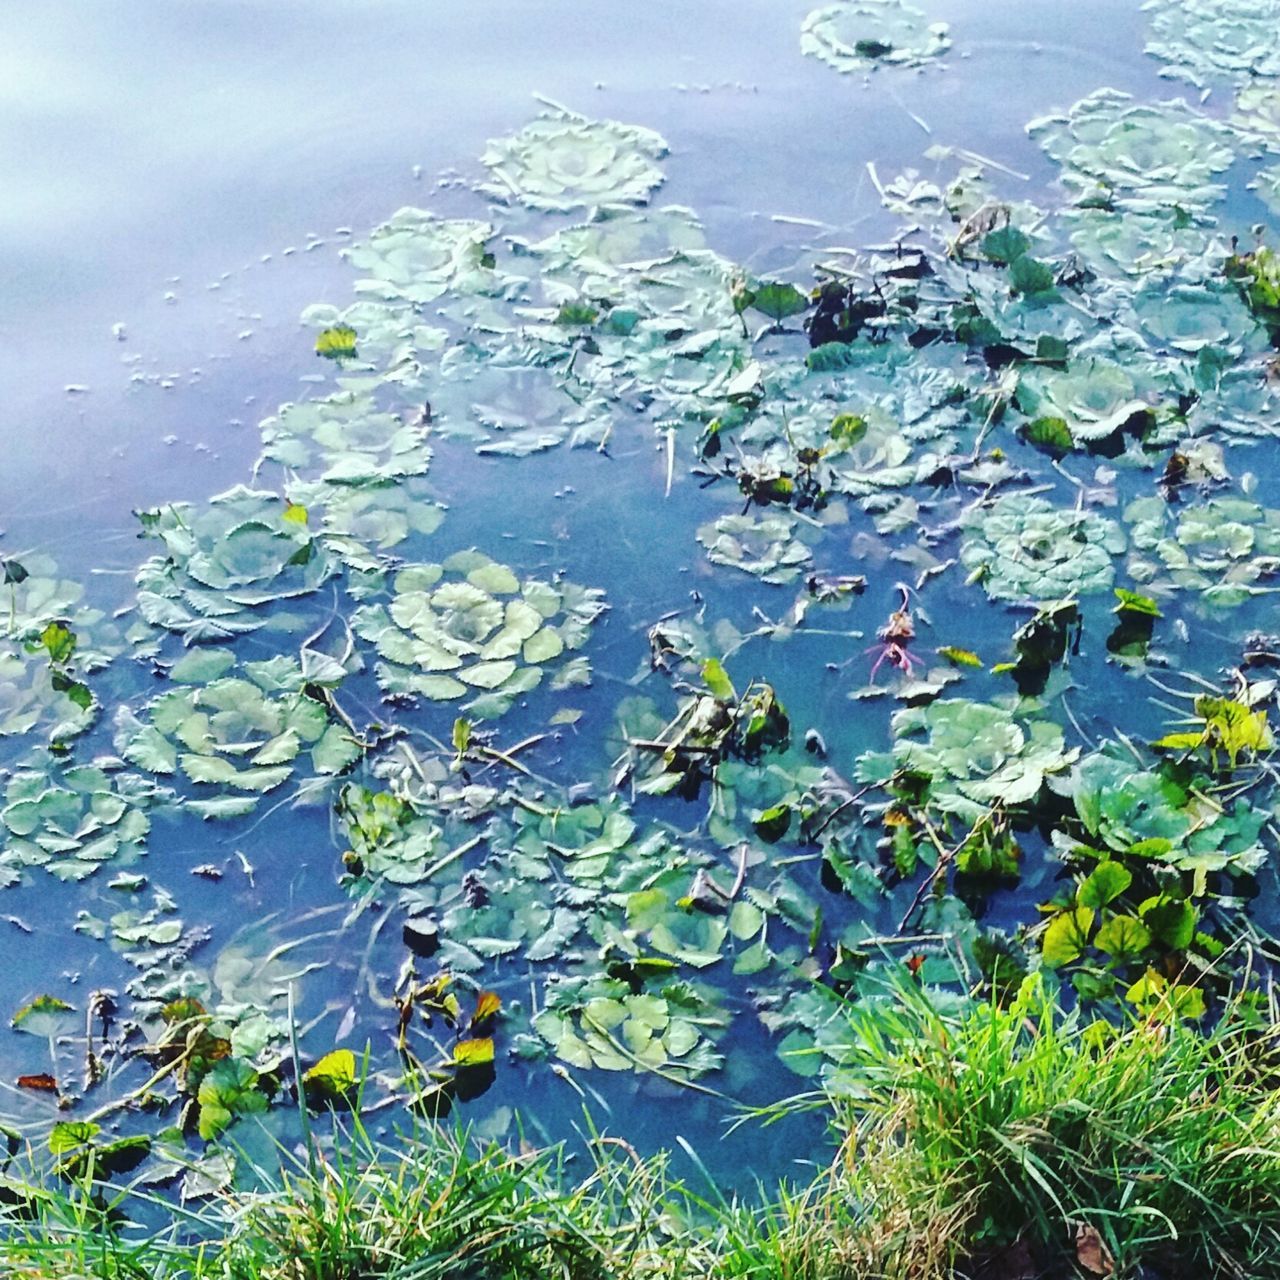 VIEW OF PLANTS IN WATER